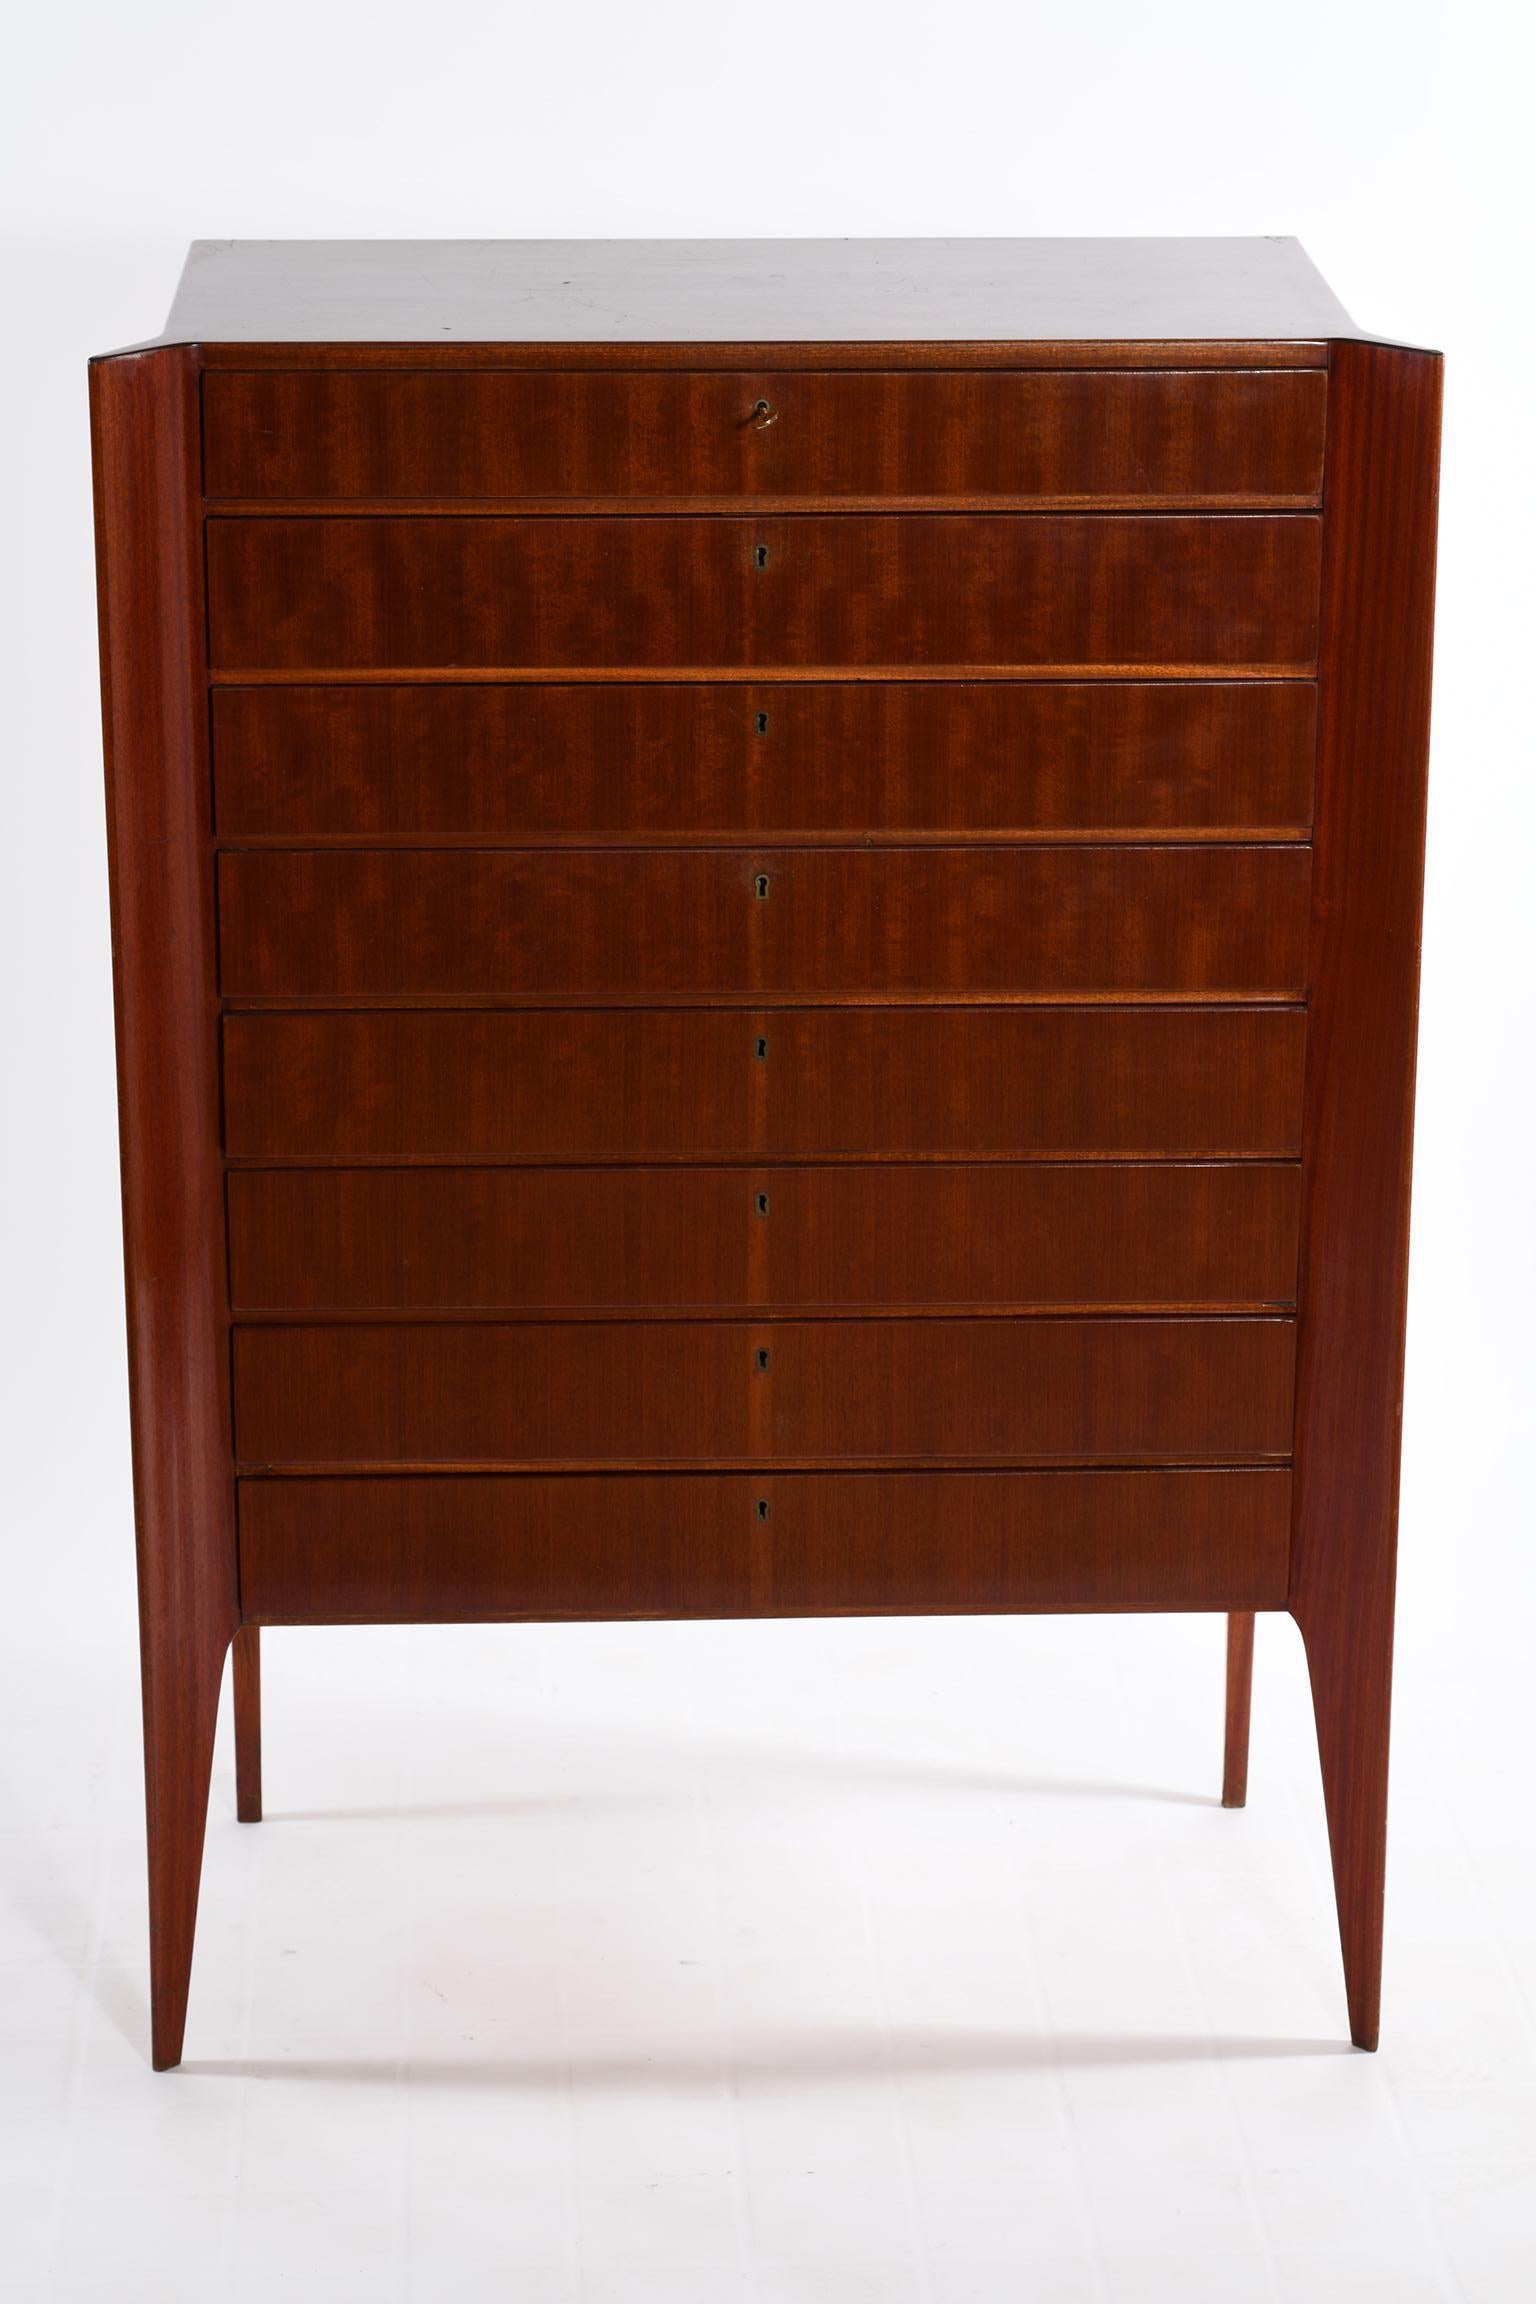 Chest of drawers with eight drawers, the front legs emerge out of the body of the furniture like fins, becoming thinner downwards.
Cavatorta Italia 1950s. Mid-Century Modern.
 